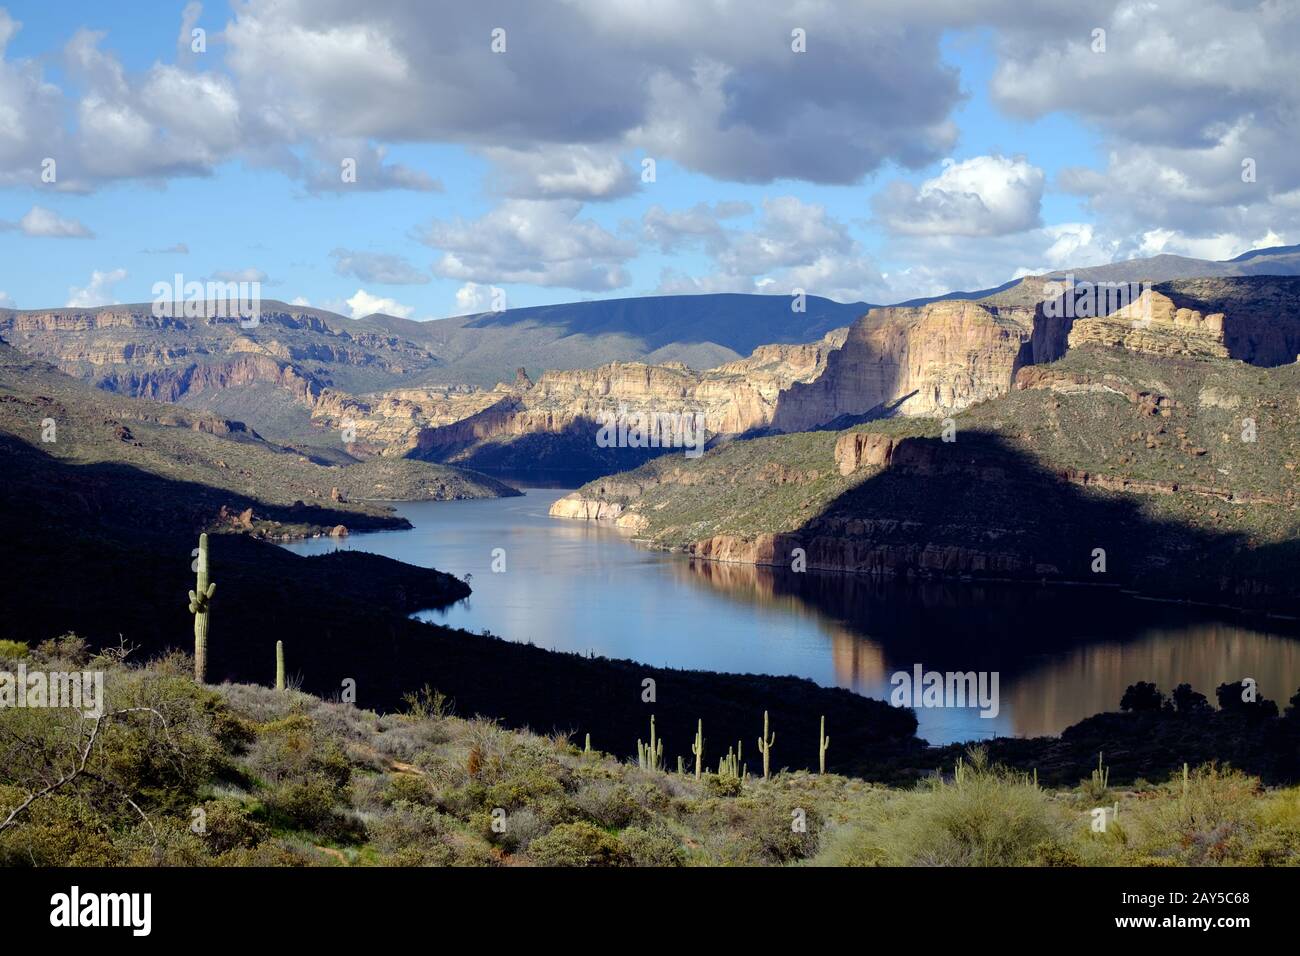 Apache Lake is one of four reservoirs along the Salt River in central Arizona located about 65 miles northeast of Phoenix. Stock Photo